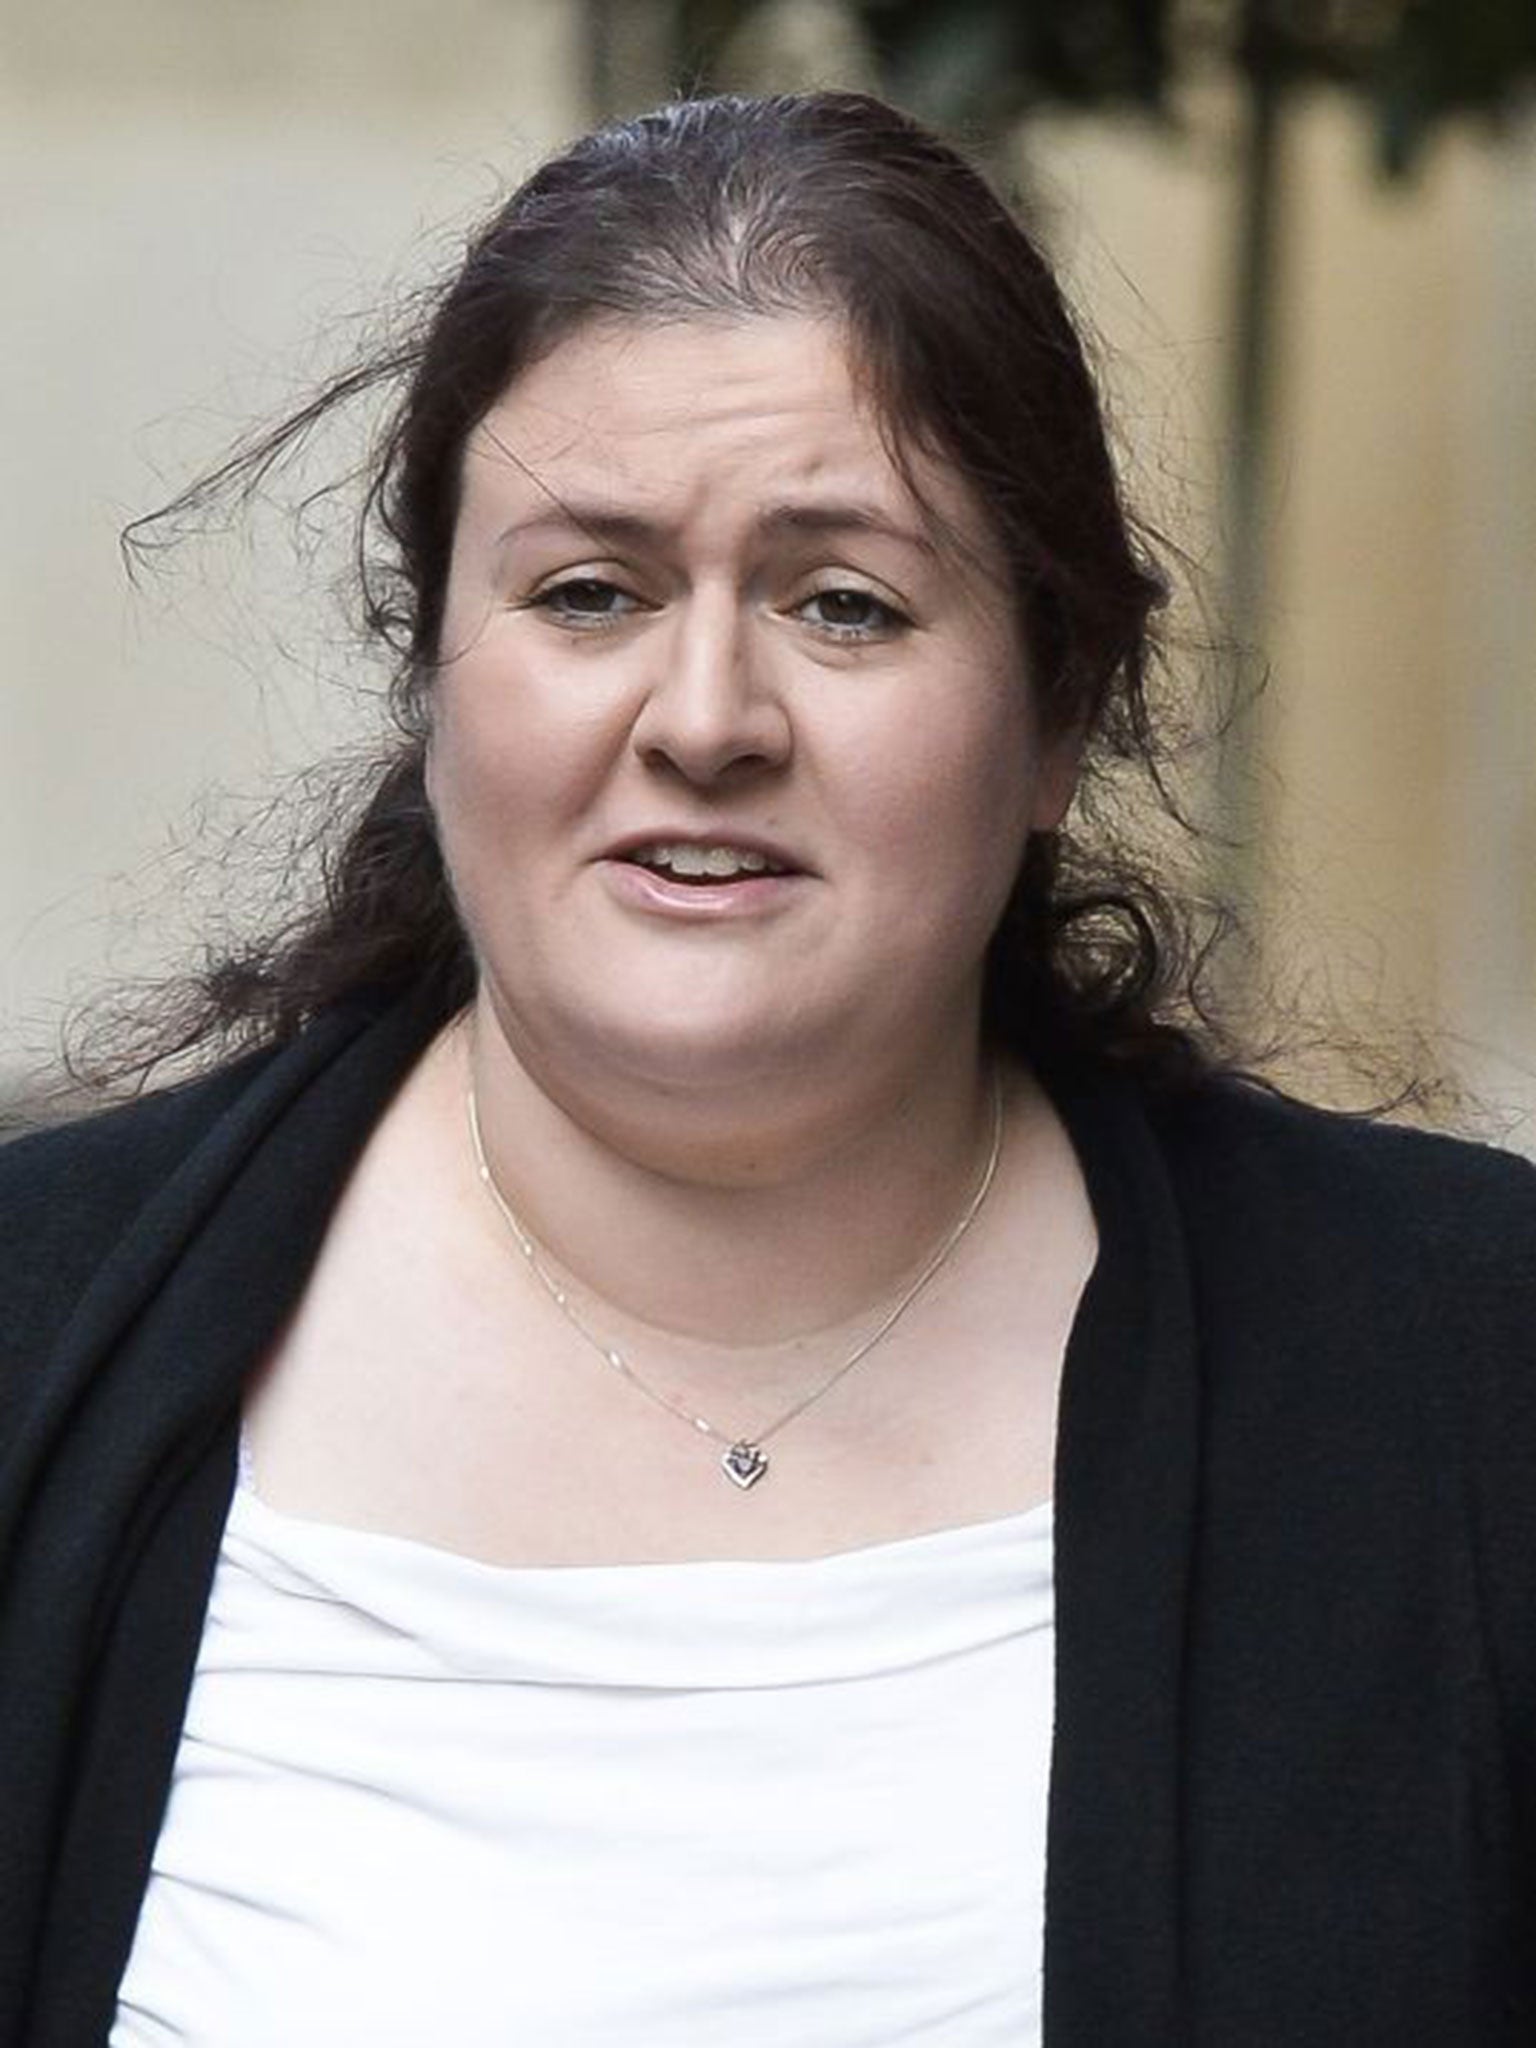 Rhiannon Brooker, who has been jailed for three and a half years after she falsely accused her boyfriend of rape so she would have an excuse for failing her legal exams.